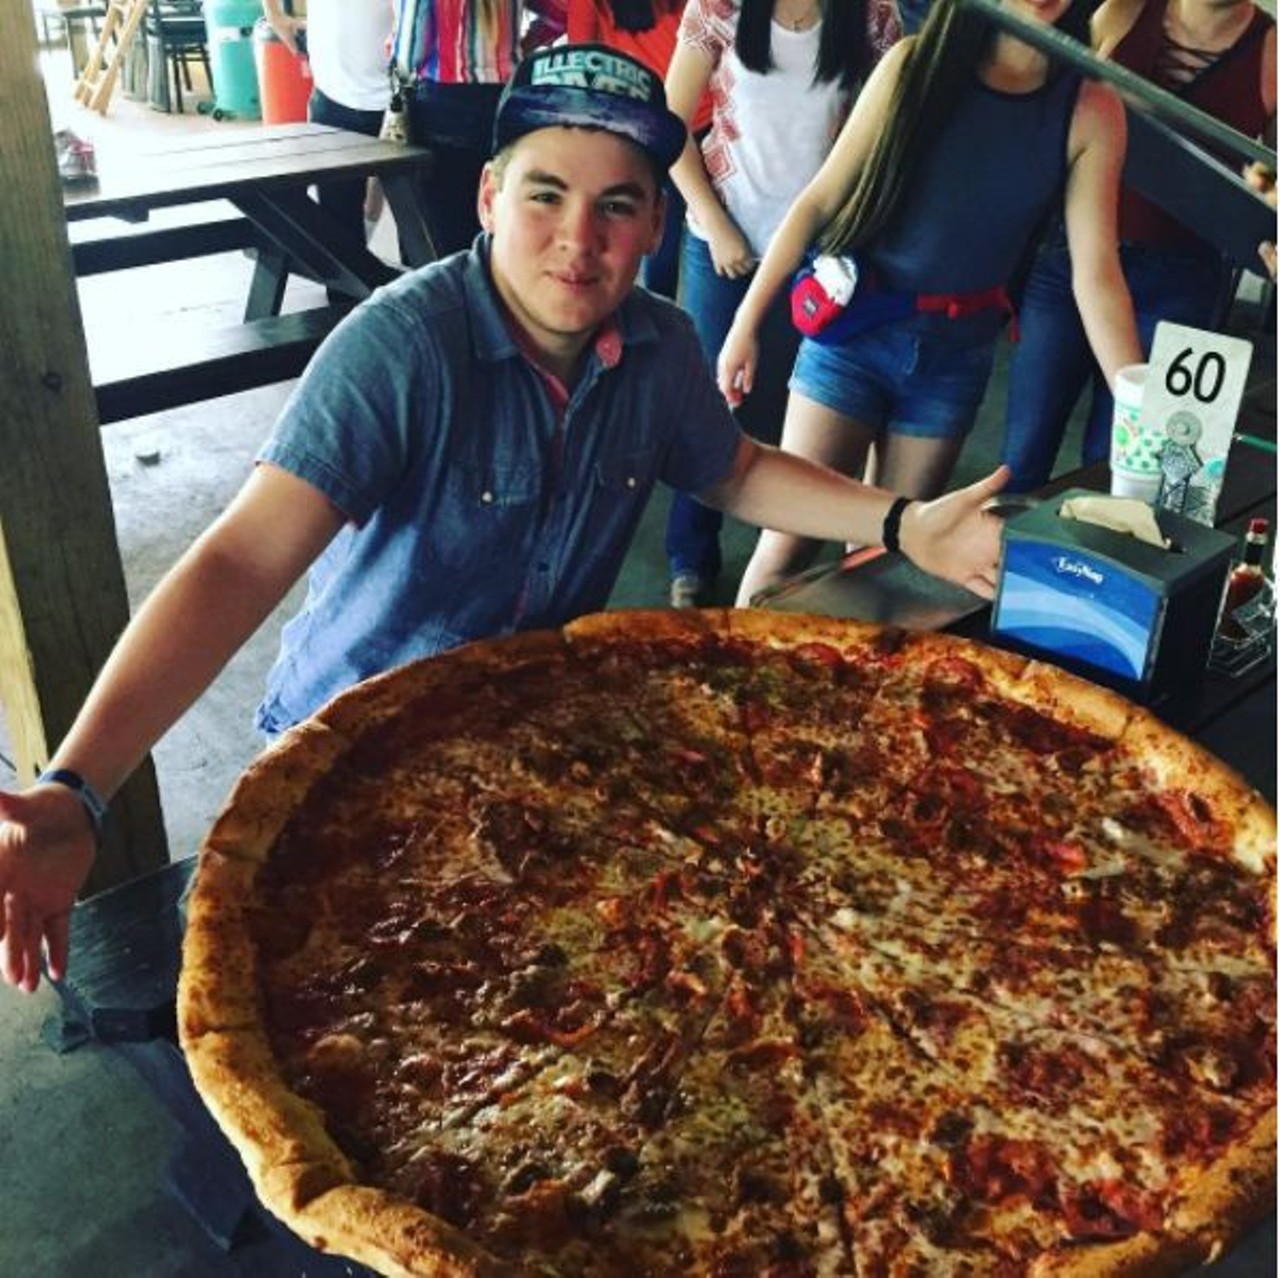 Pizza from Big Lou's (but plan ahead!)
2048 S WW White Road,  (210) 337-0707
While this visit might require some planning, the payoff will be worth it. Take the crew. 
Photo via Instagram, the_averagenerd